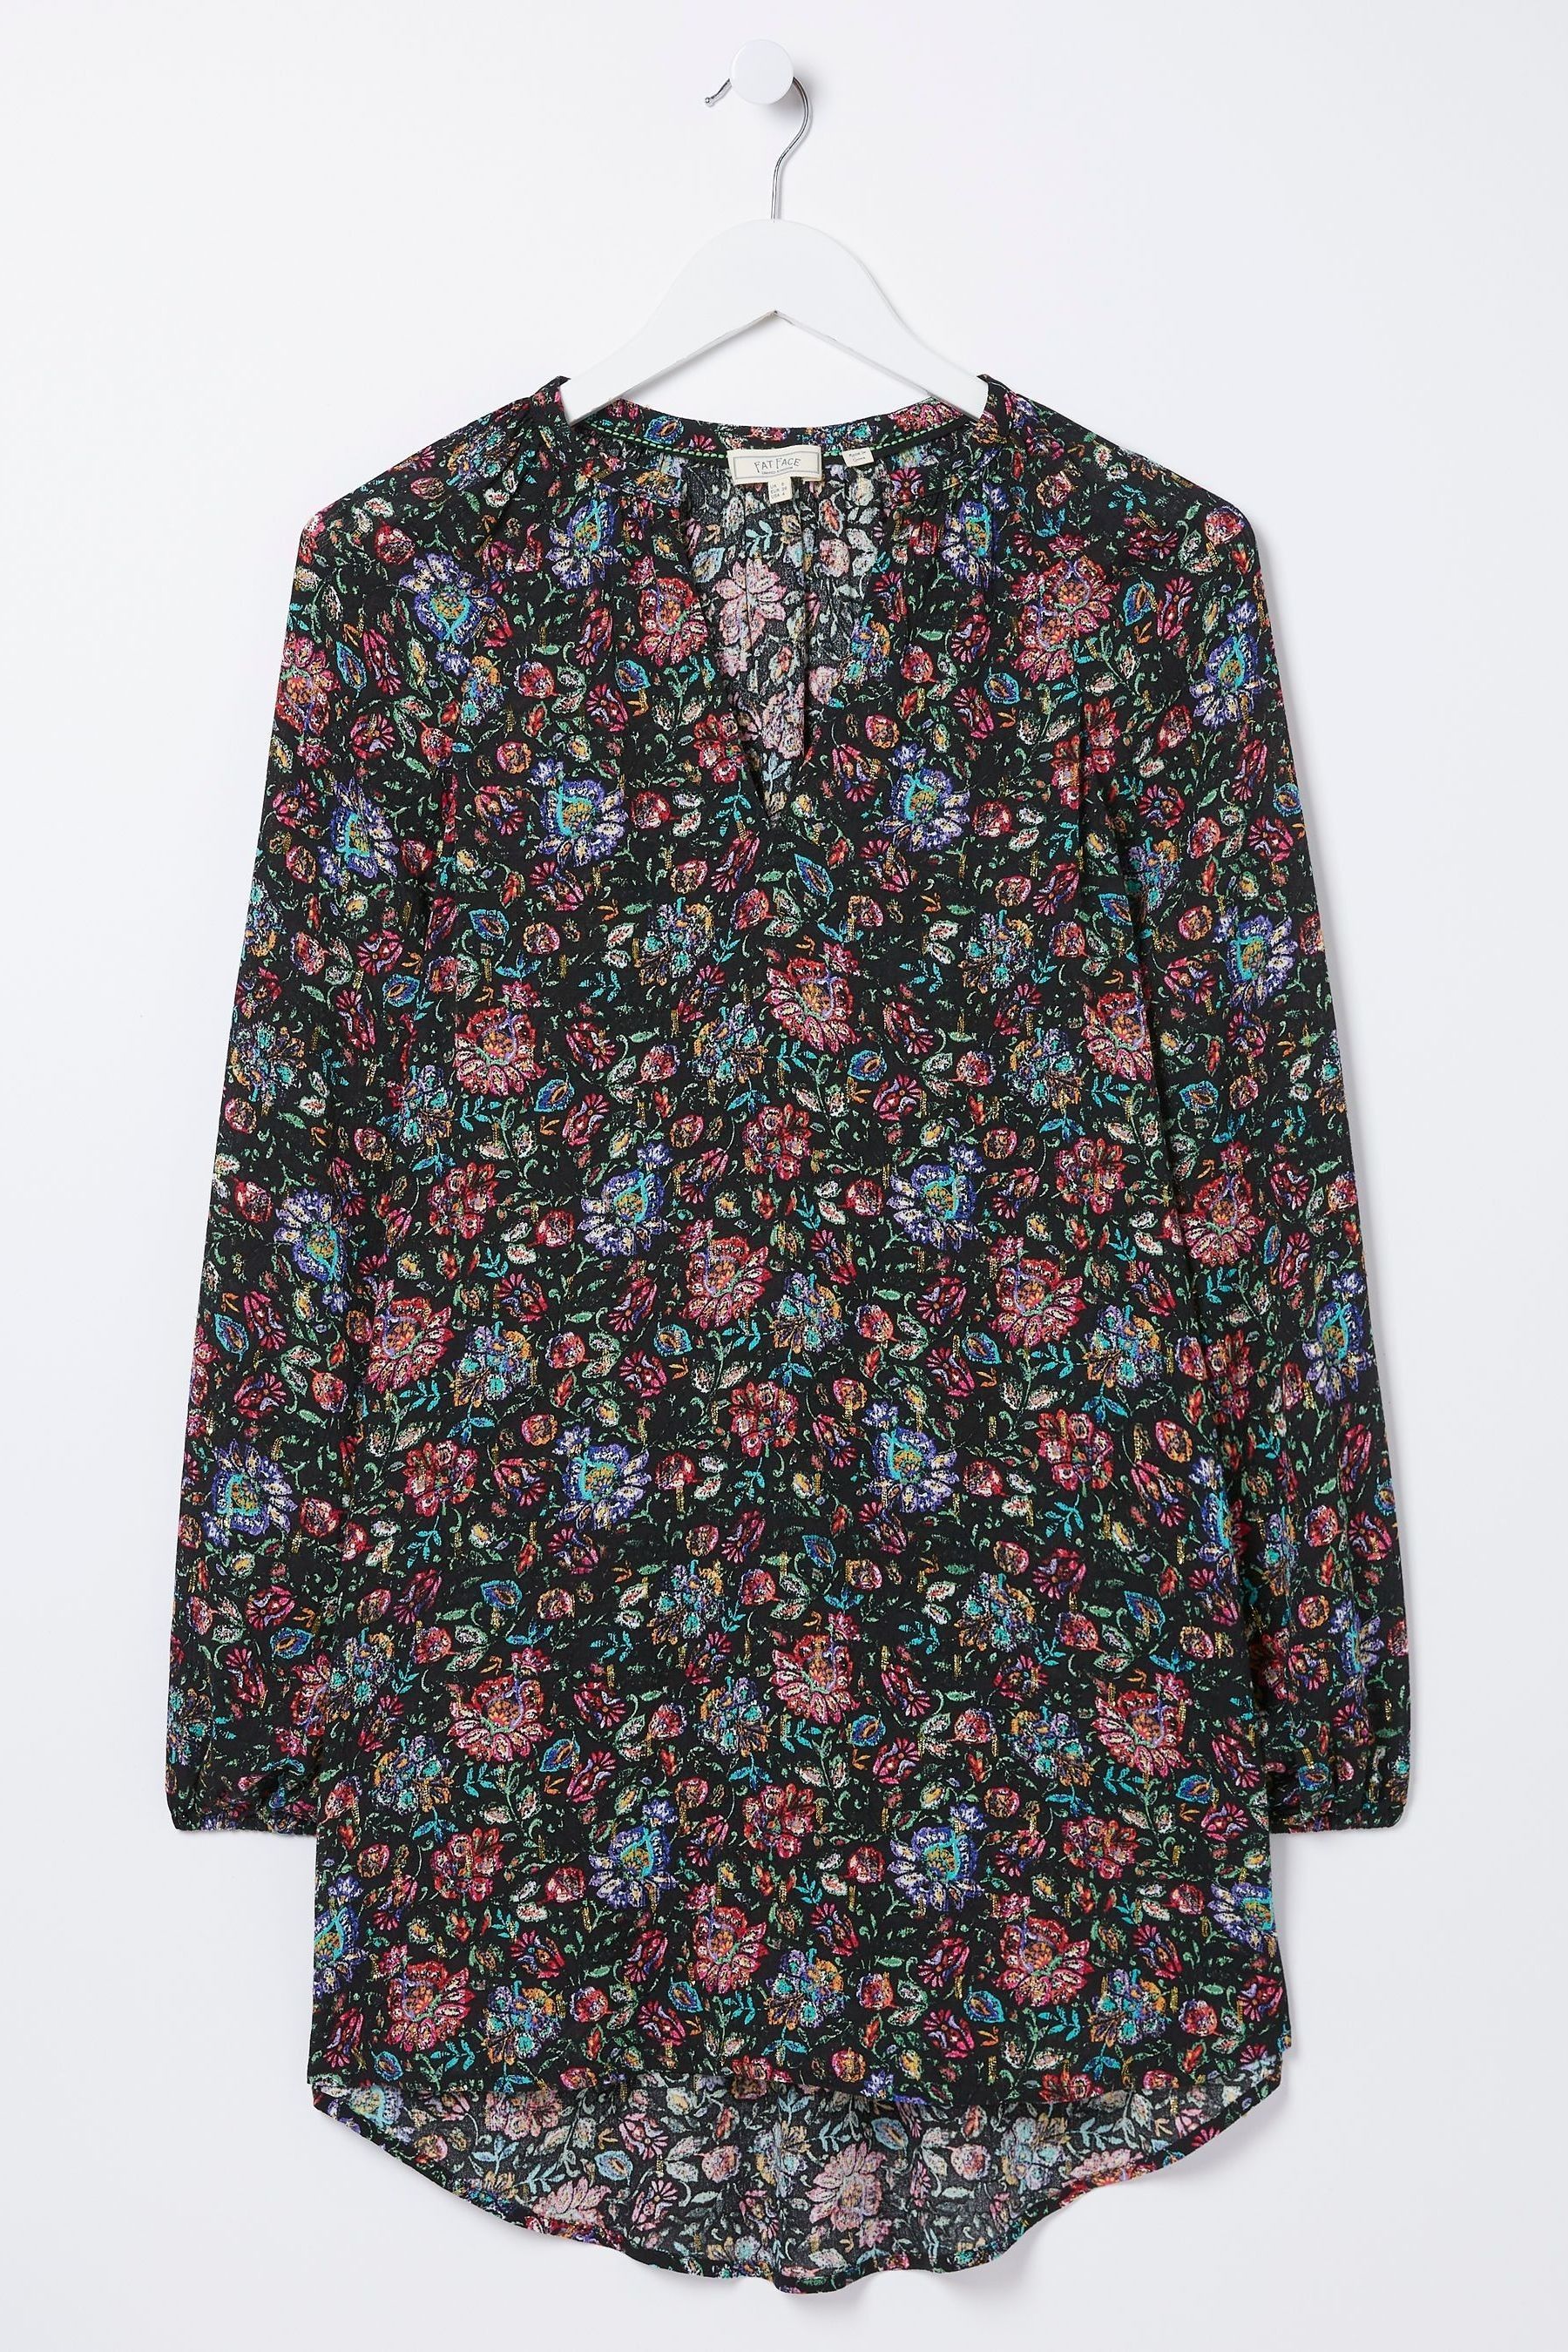 Buy FatFace Faye Multi Floral Tunic from Next Ireland